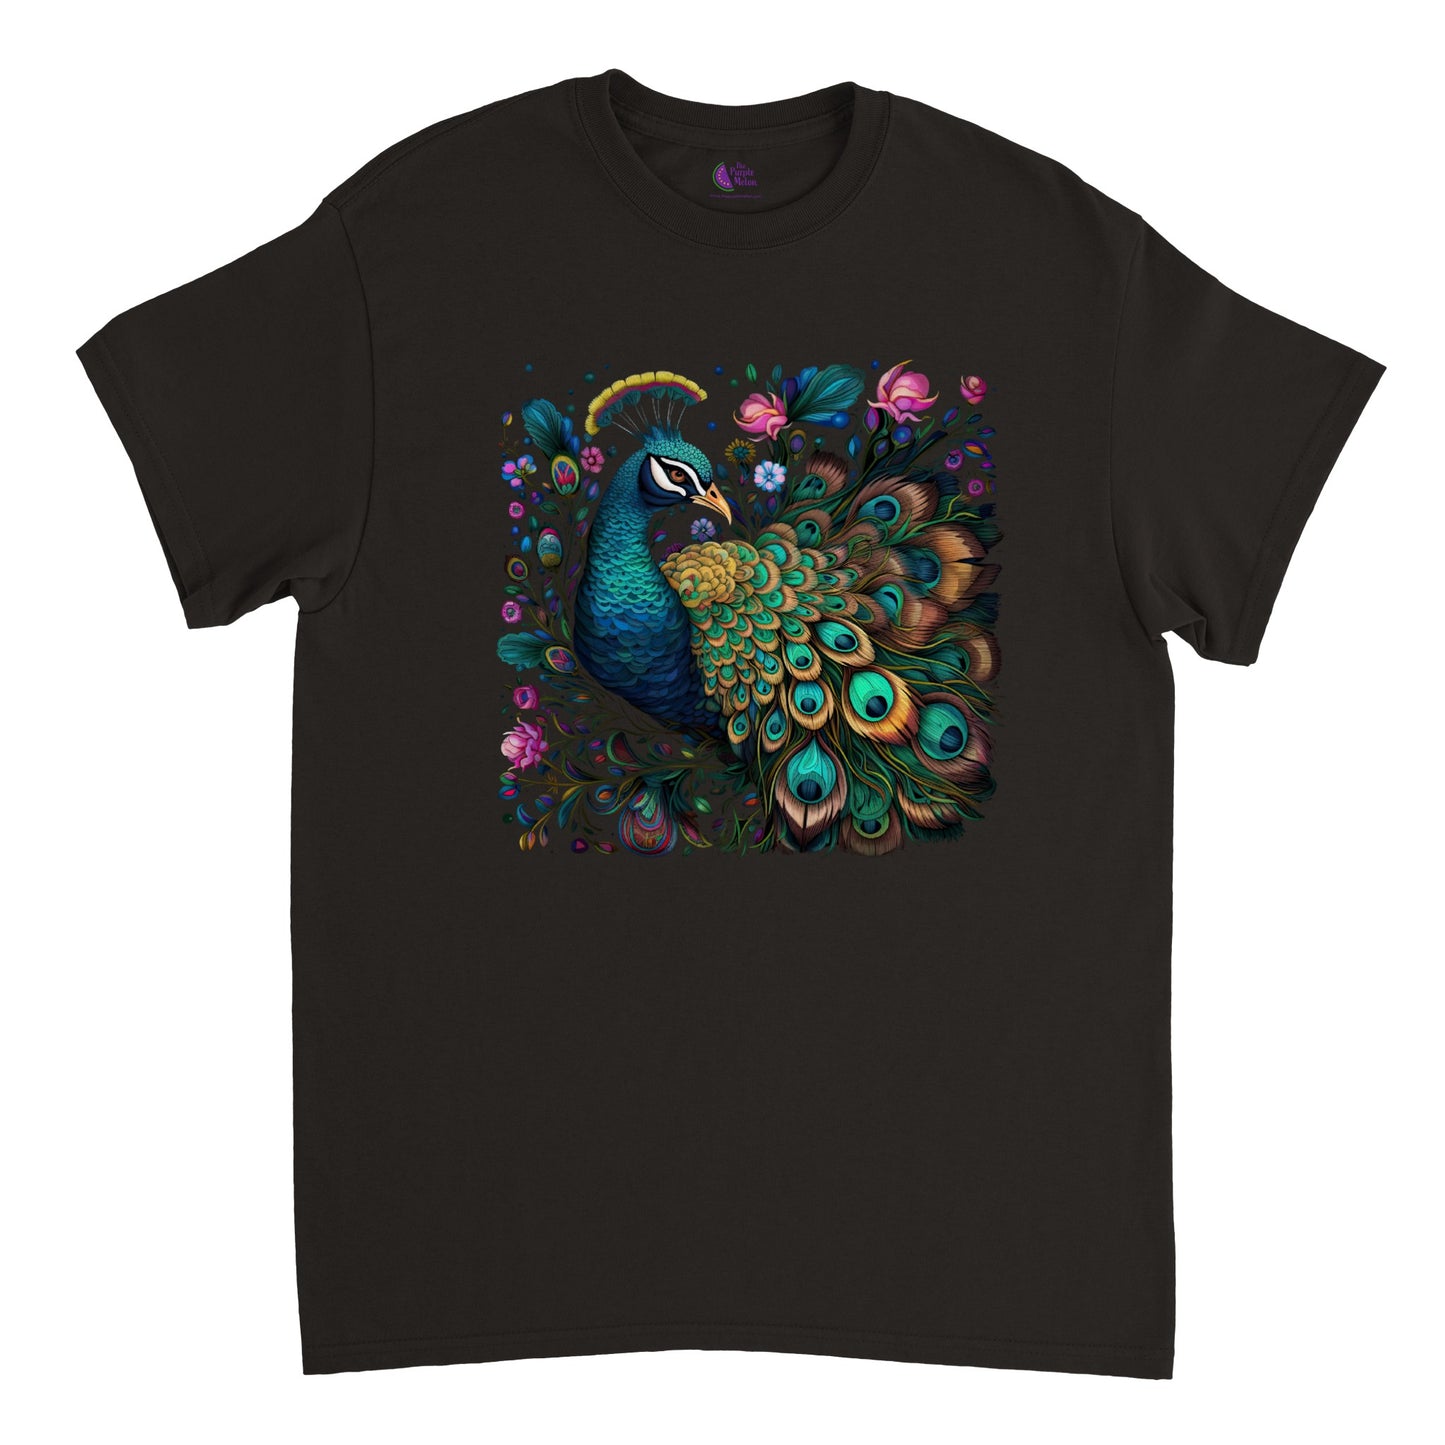 black t-shirt with a colorful floral peacock print